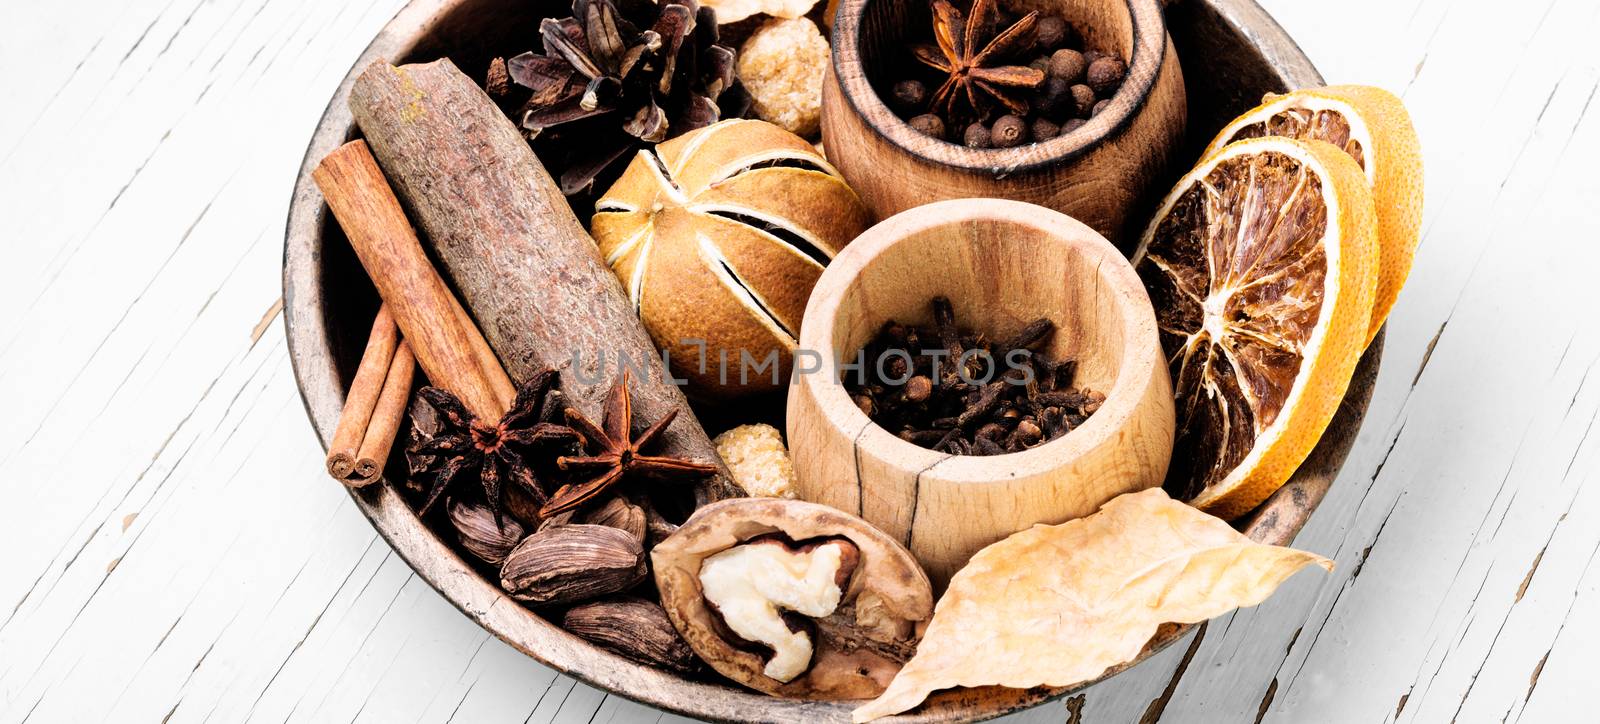 Ingredients for mulled wine on a white background.Autumn drink mulled wine